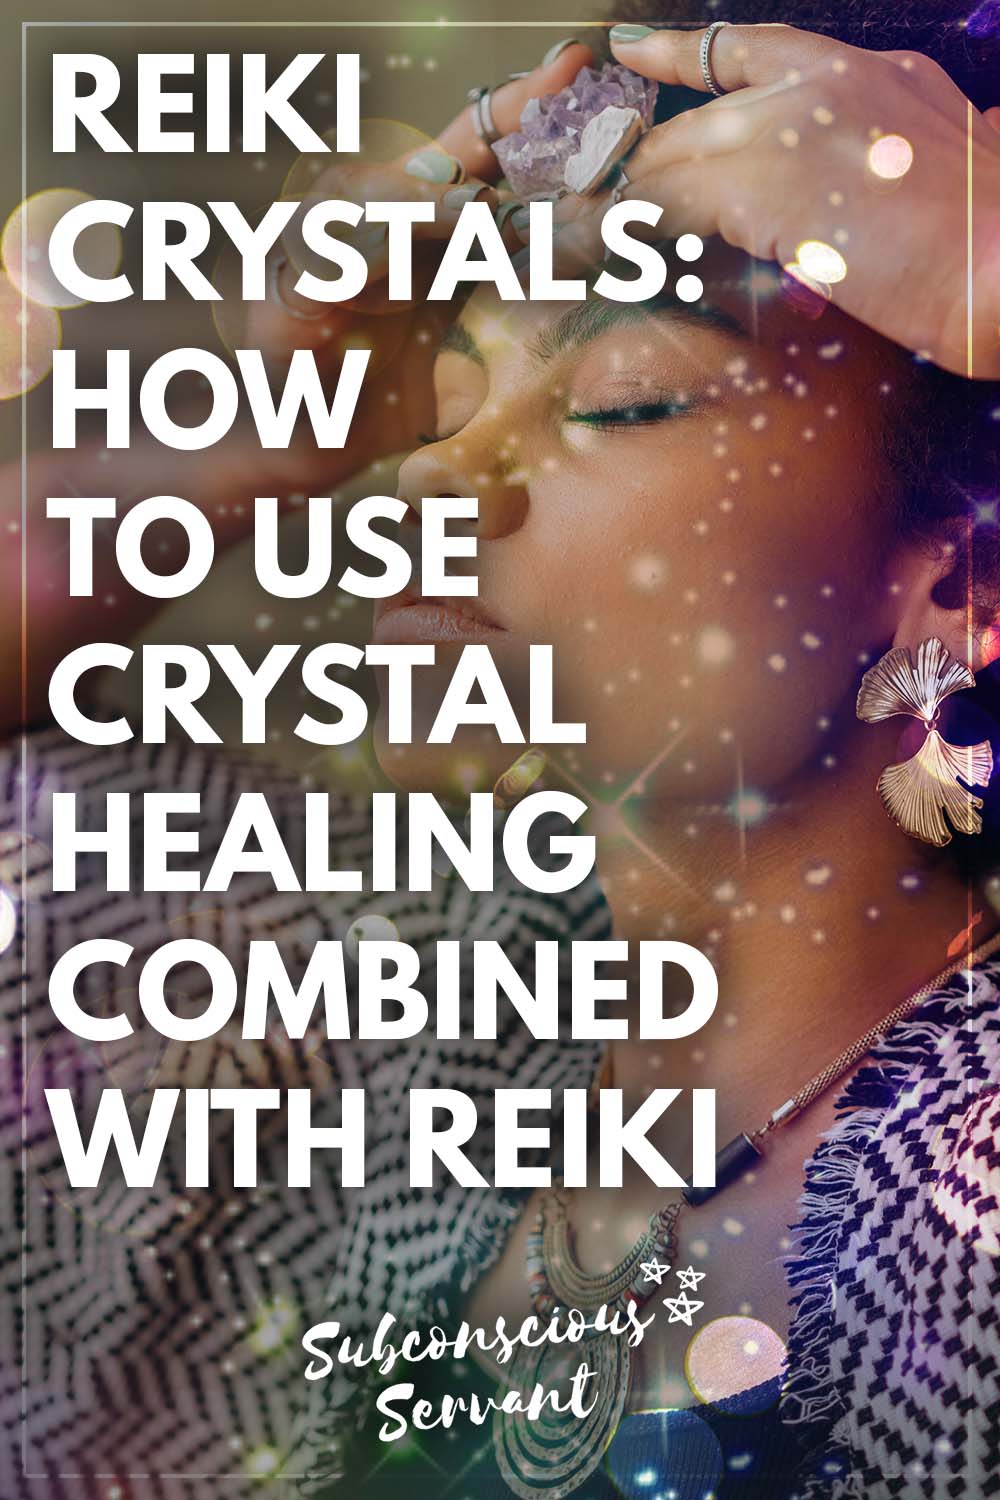 Reiki Crystals: How to use Crystal Healing Combined with Reiki